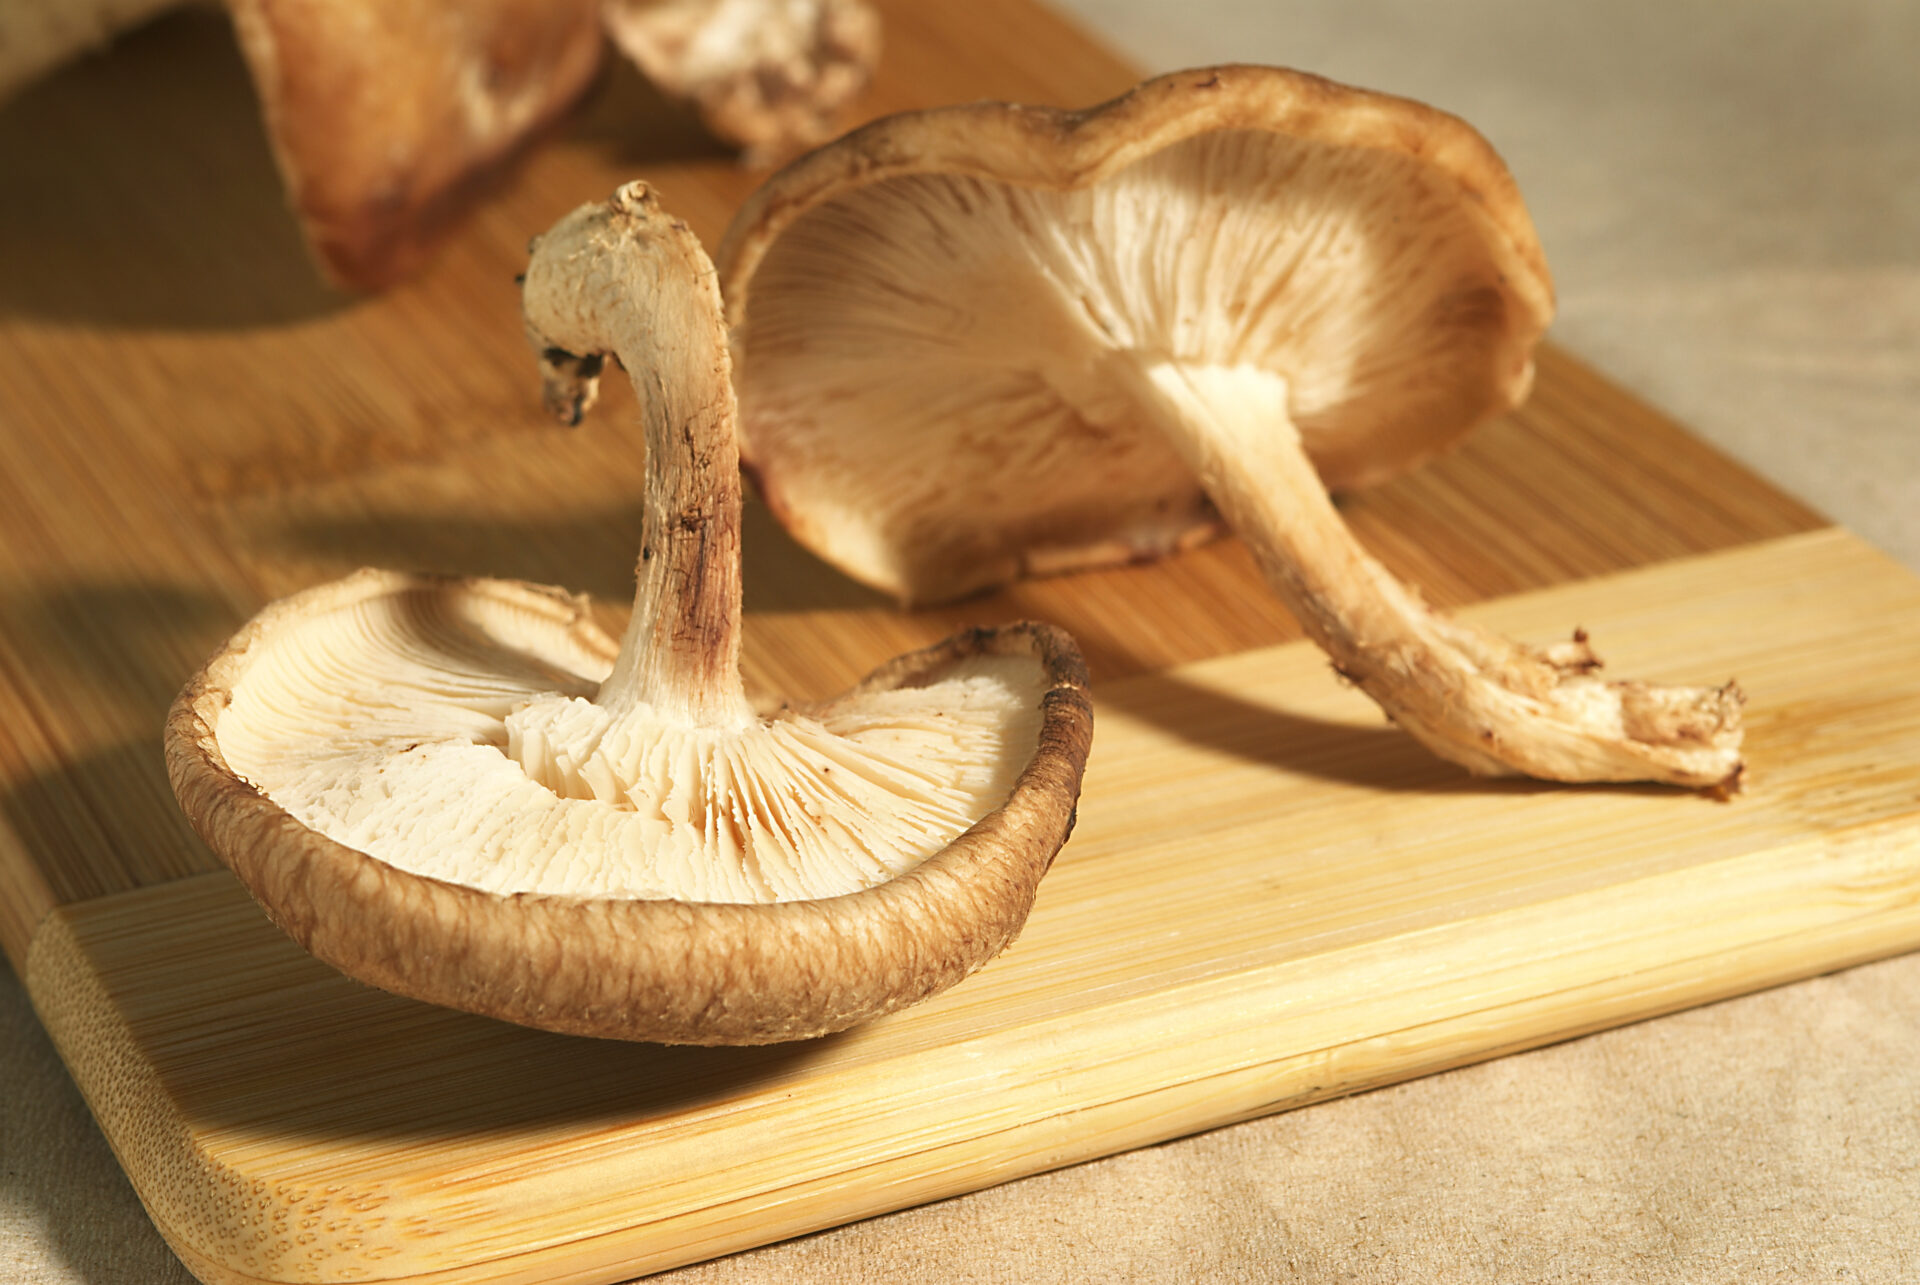 Heads Up Foodies: Appalachian Forests Are Ideal for Growing Shiitake Mushrooms